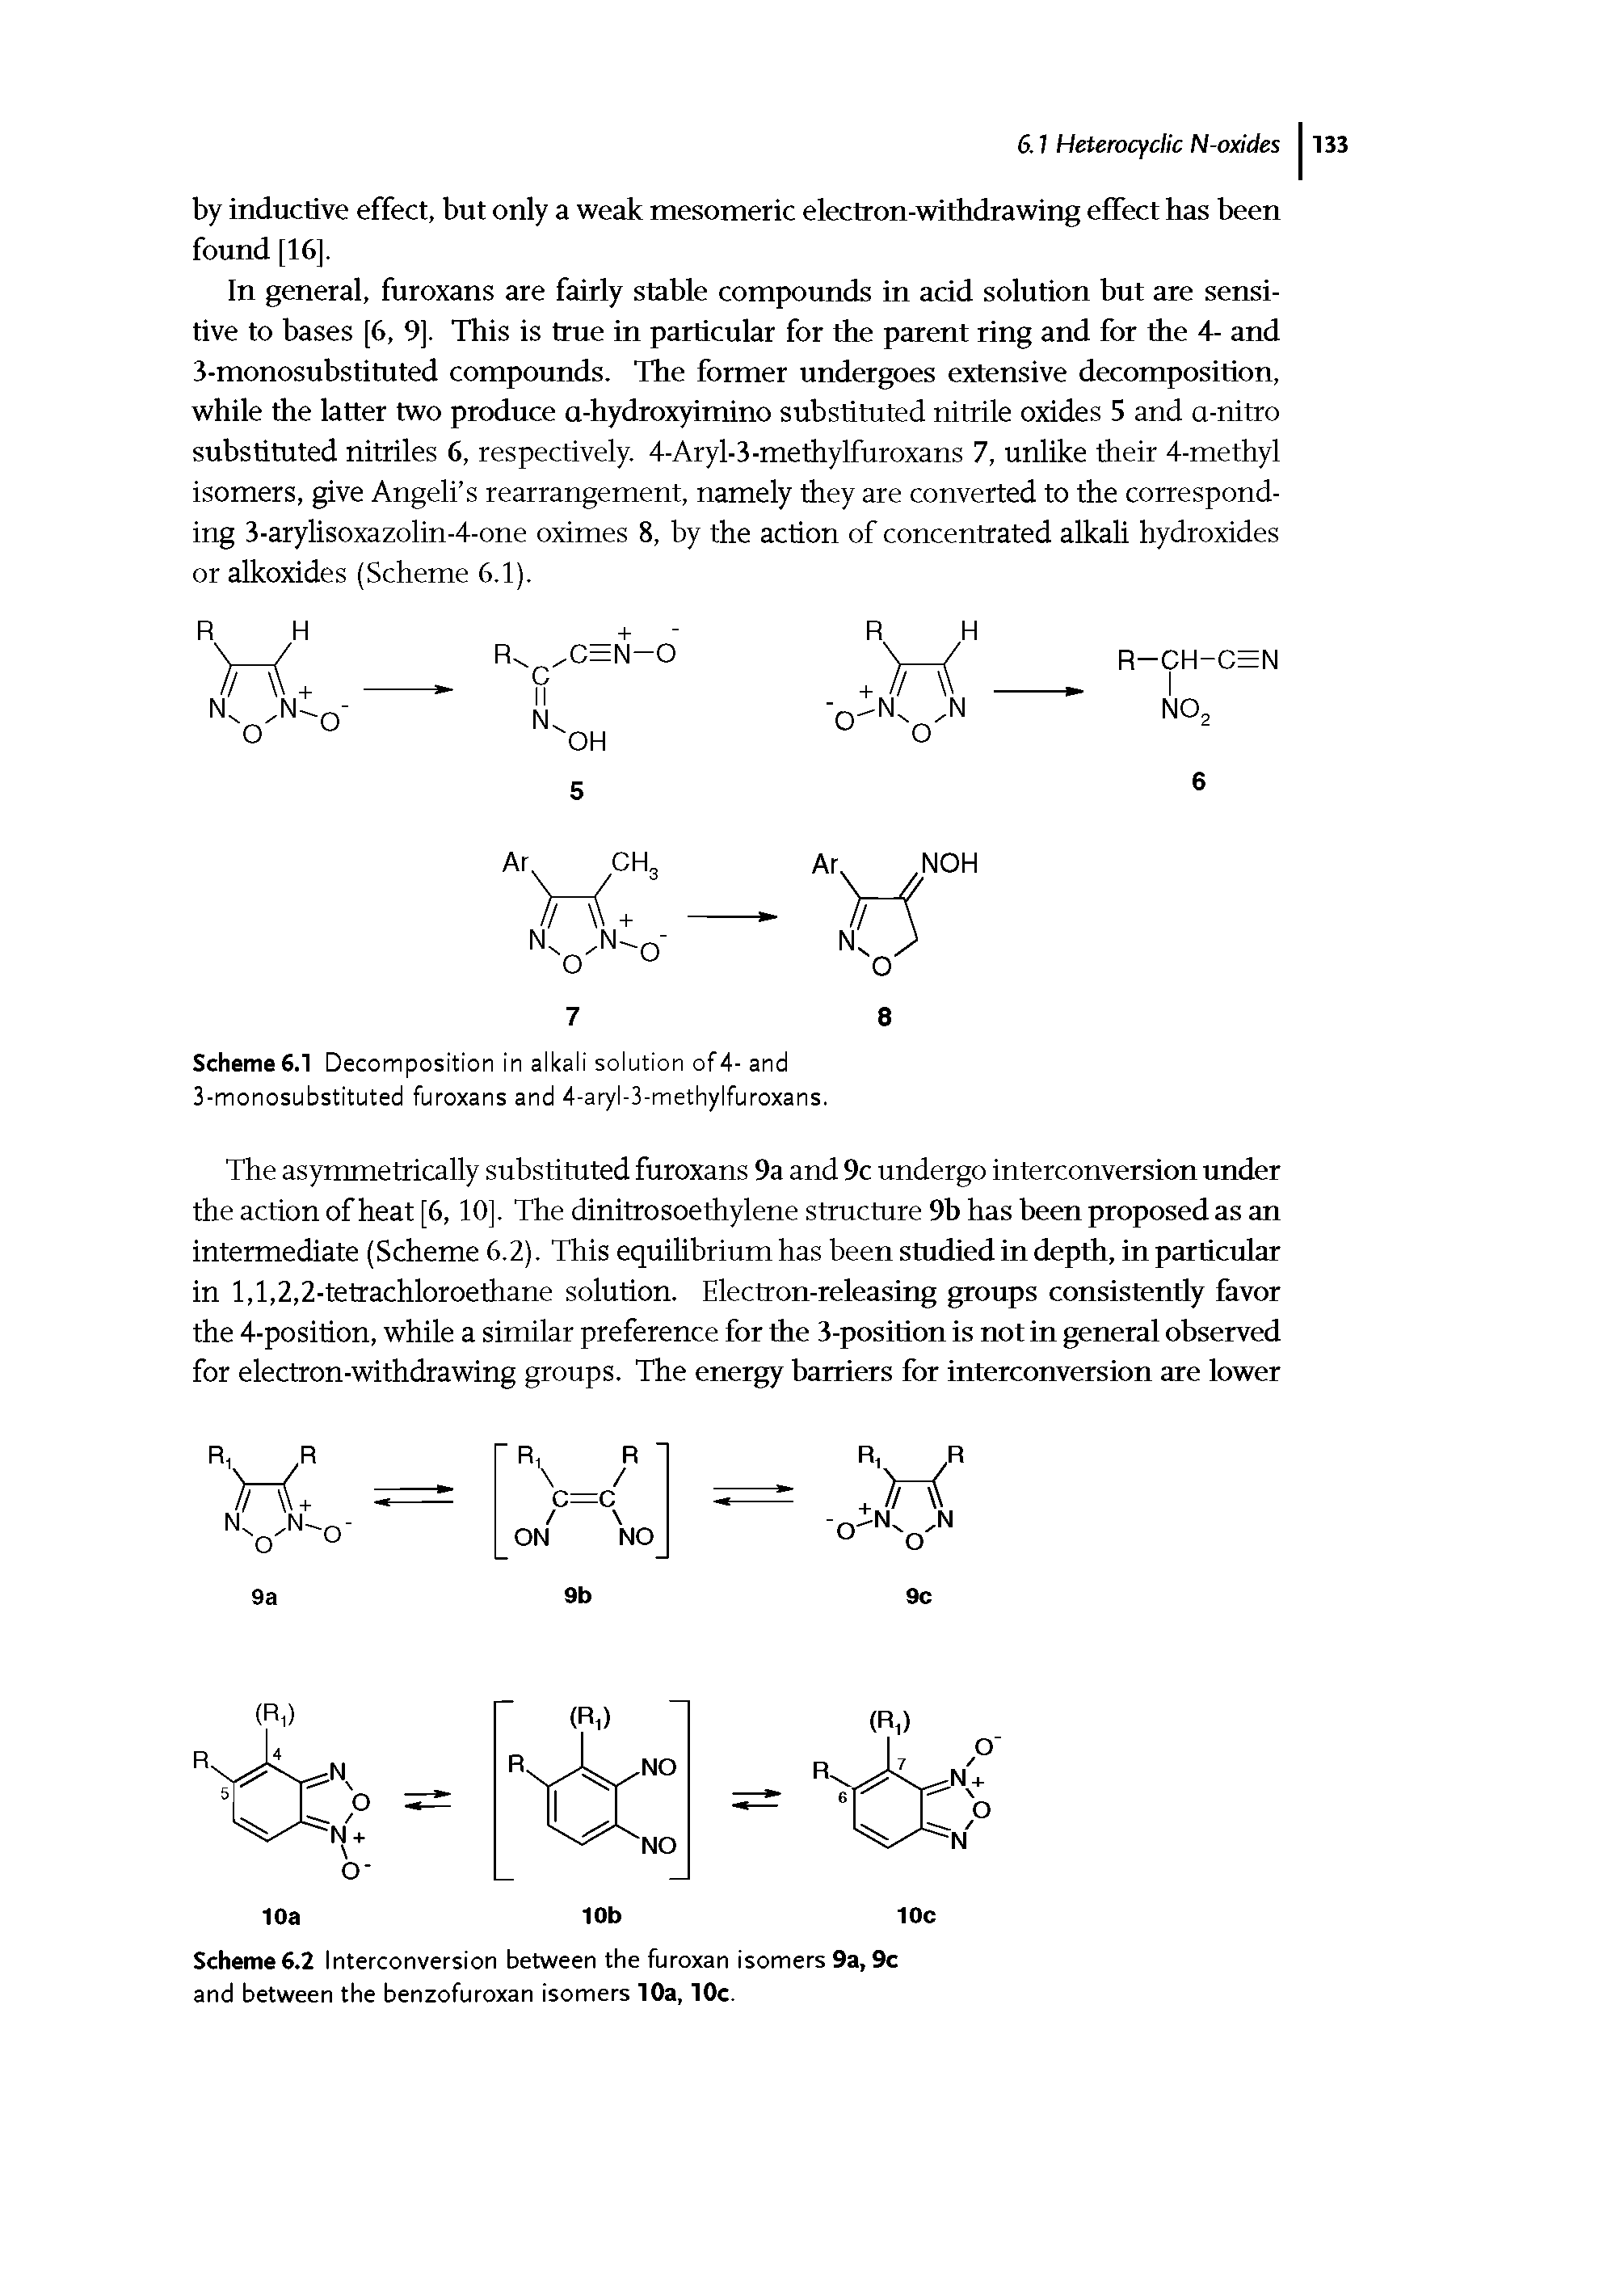 Scheme 6.1 Decomposition in alkali solution of4- and 3-monosubstituted furoxans and 4-aryl-3-methylfuroxans.